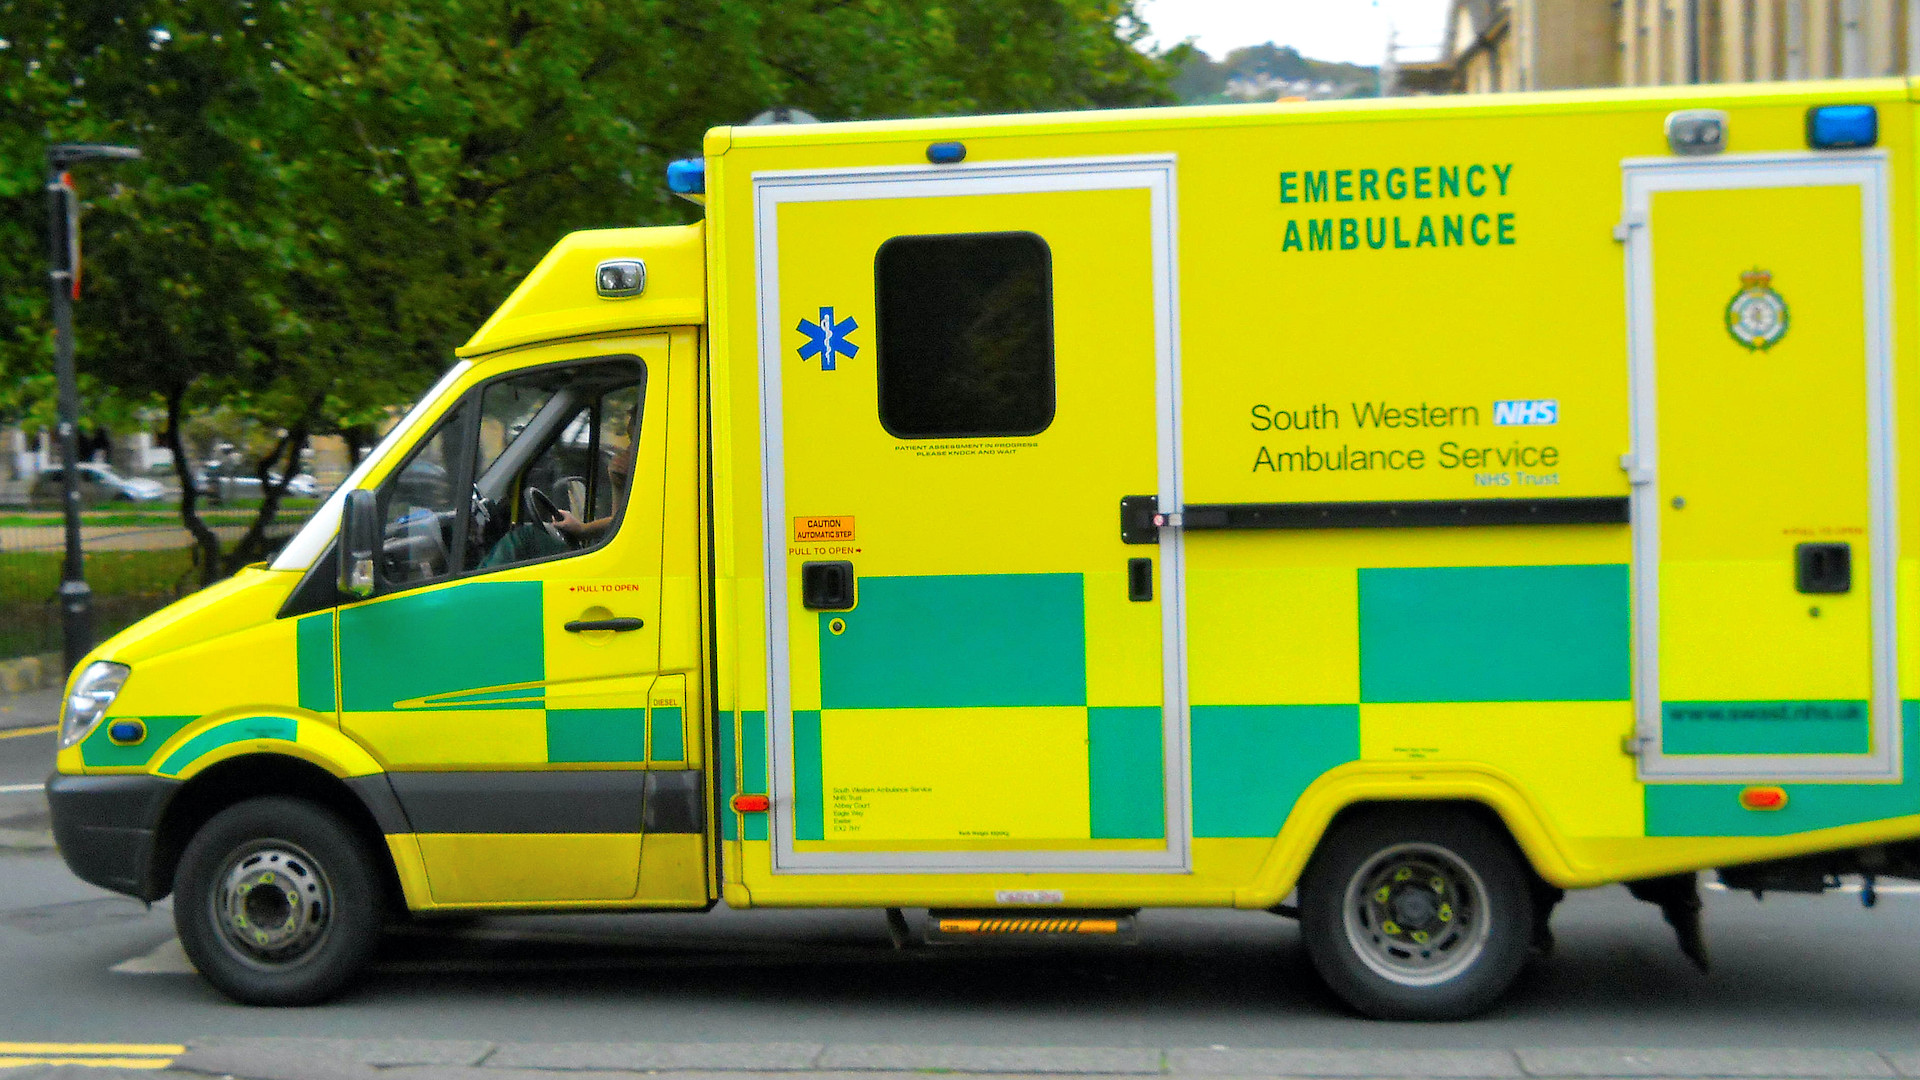 A South Western ambulance by the side of the road